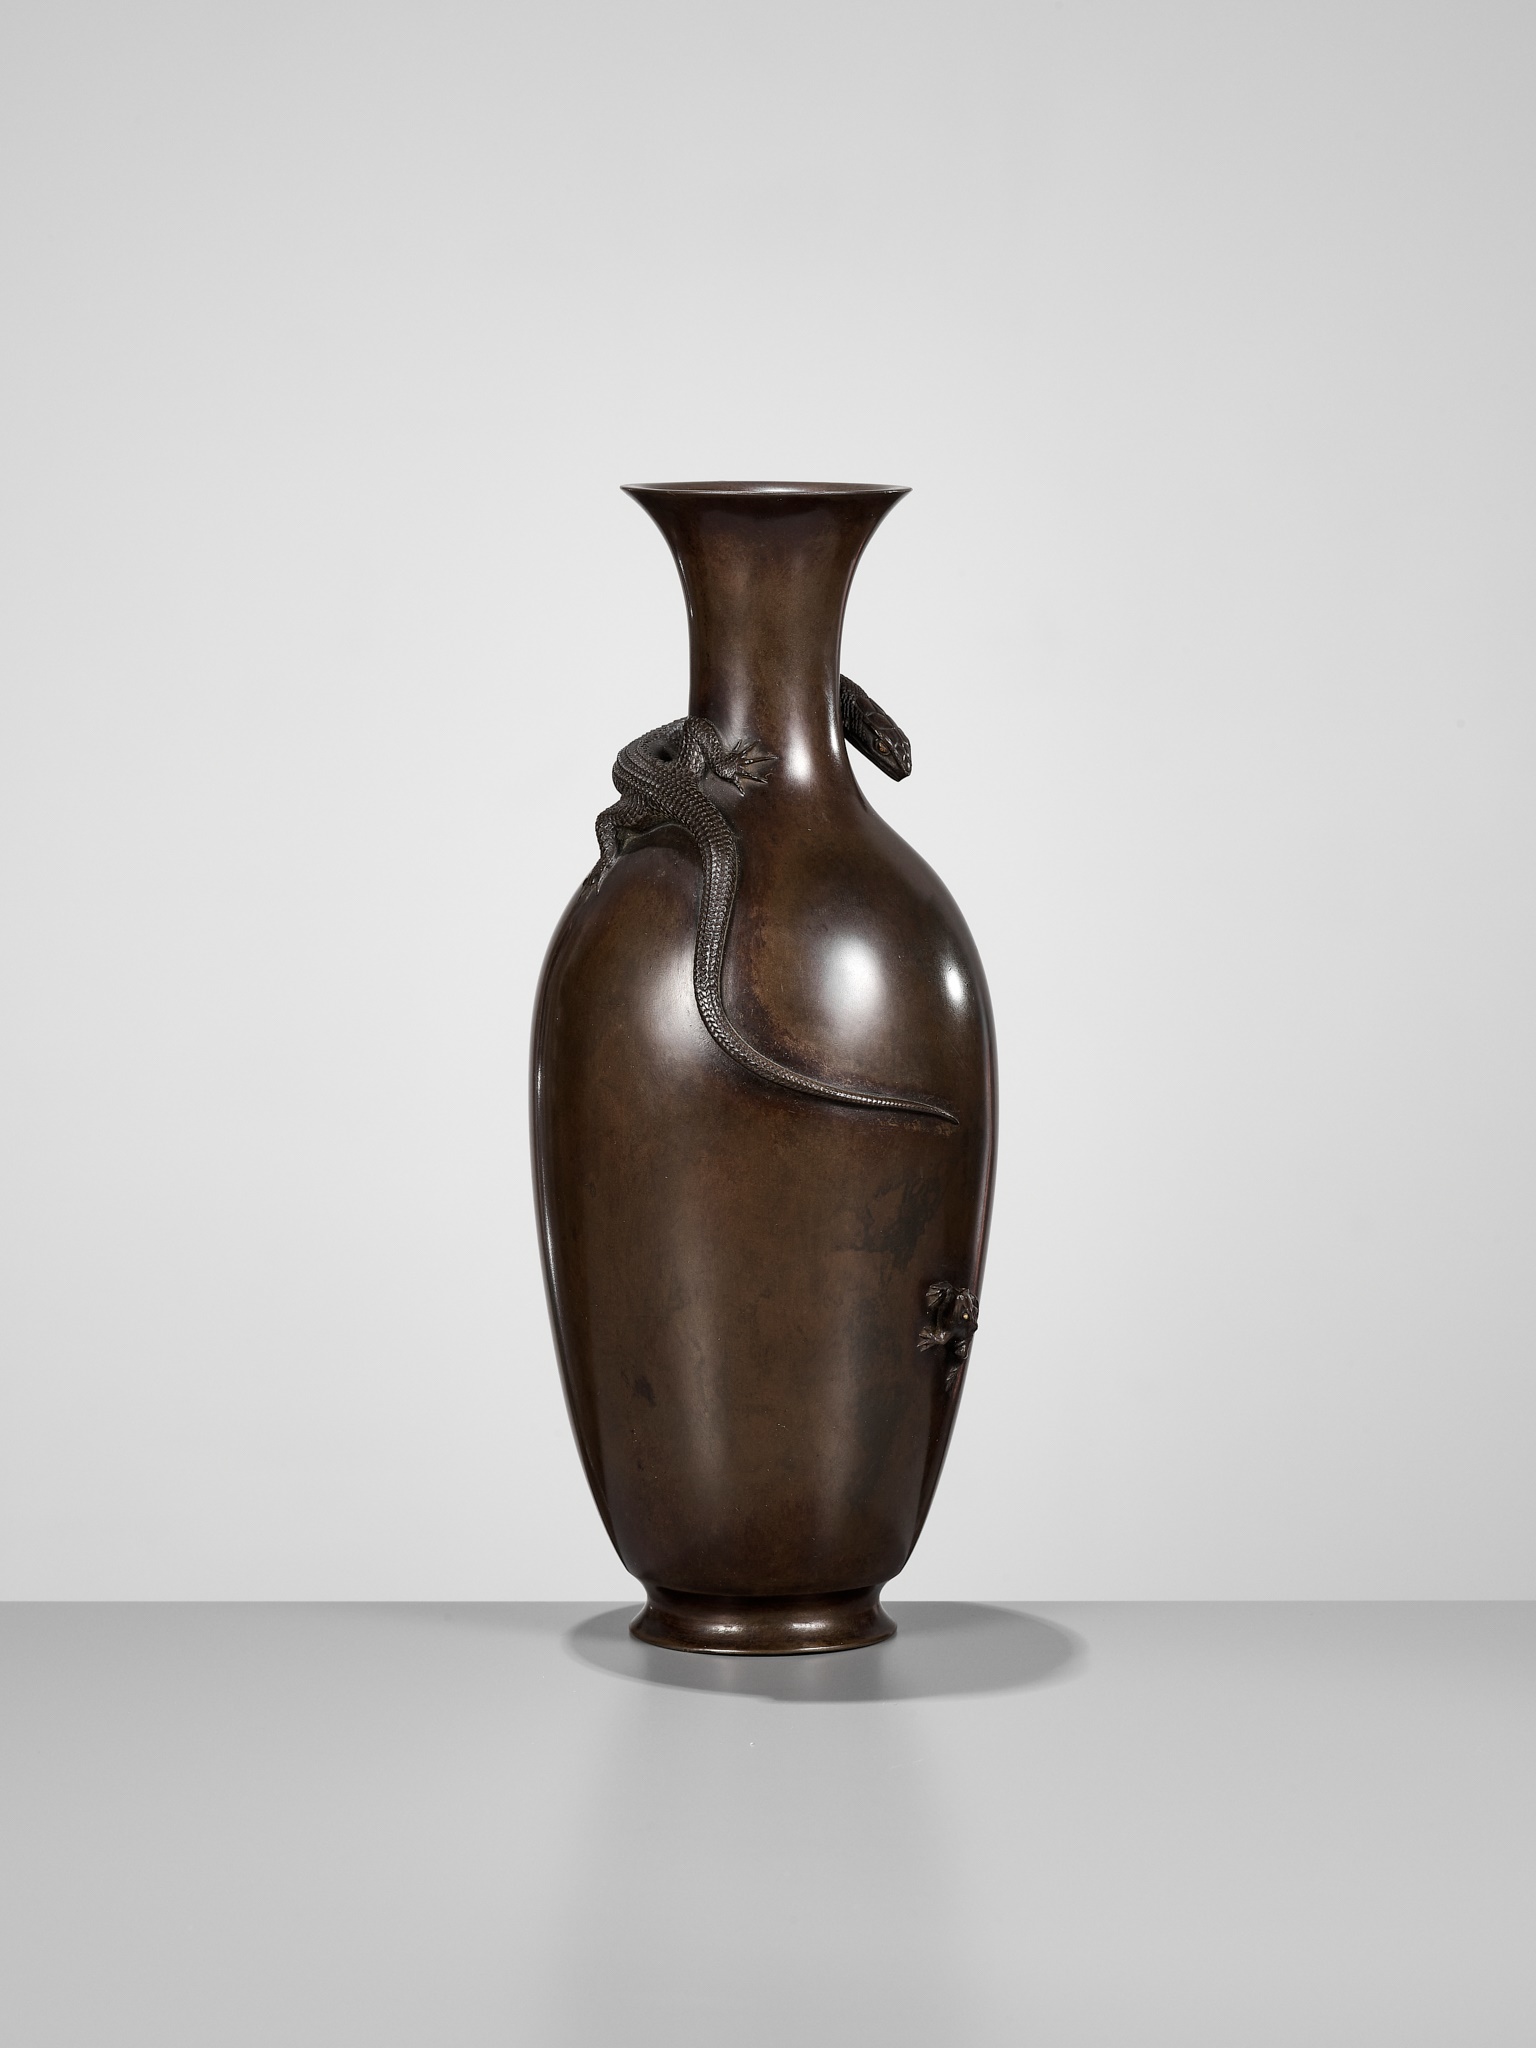 AKICHIKA: A FINE BRONZE VASE WITH LIZARD PREYING ON A FROG - Image 9 of 13